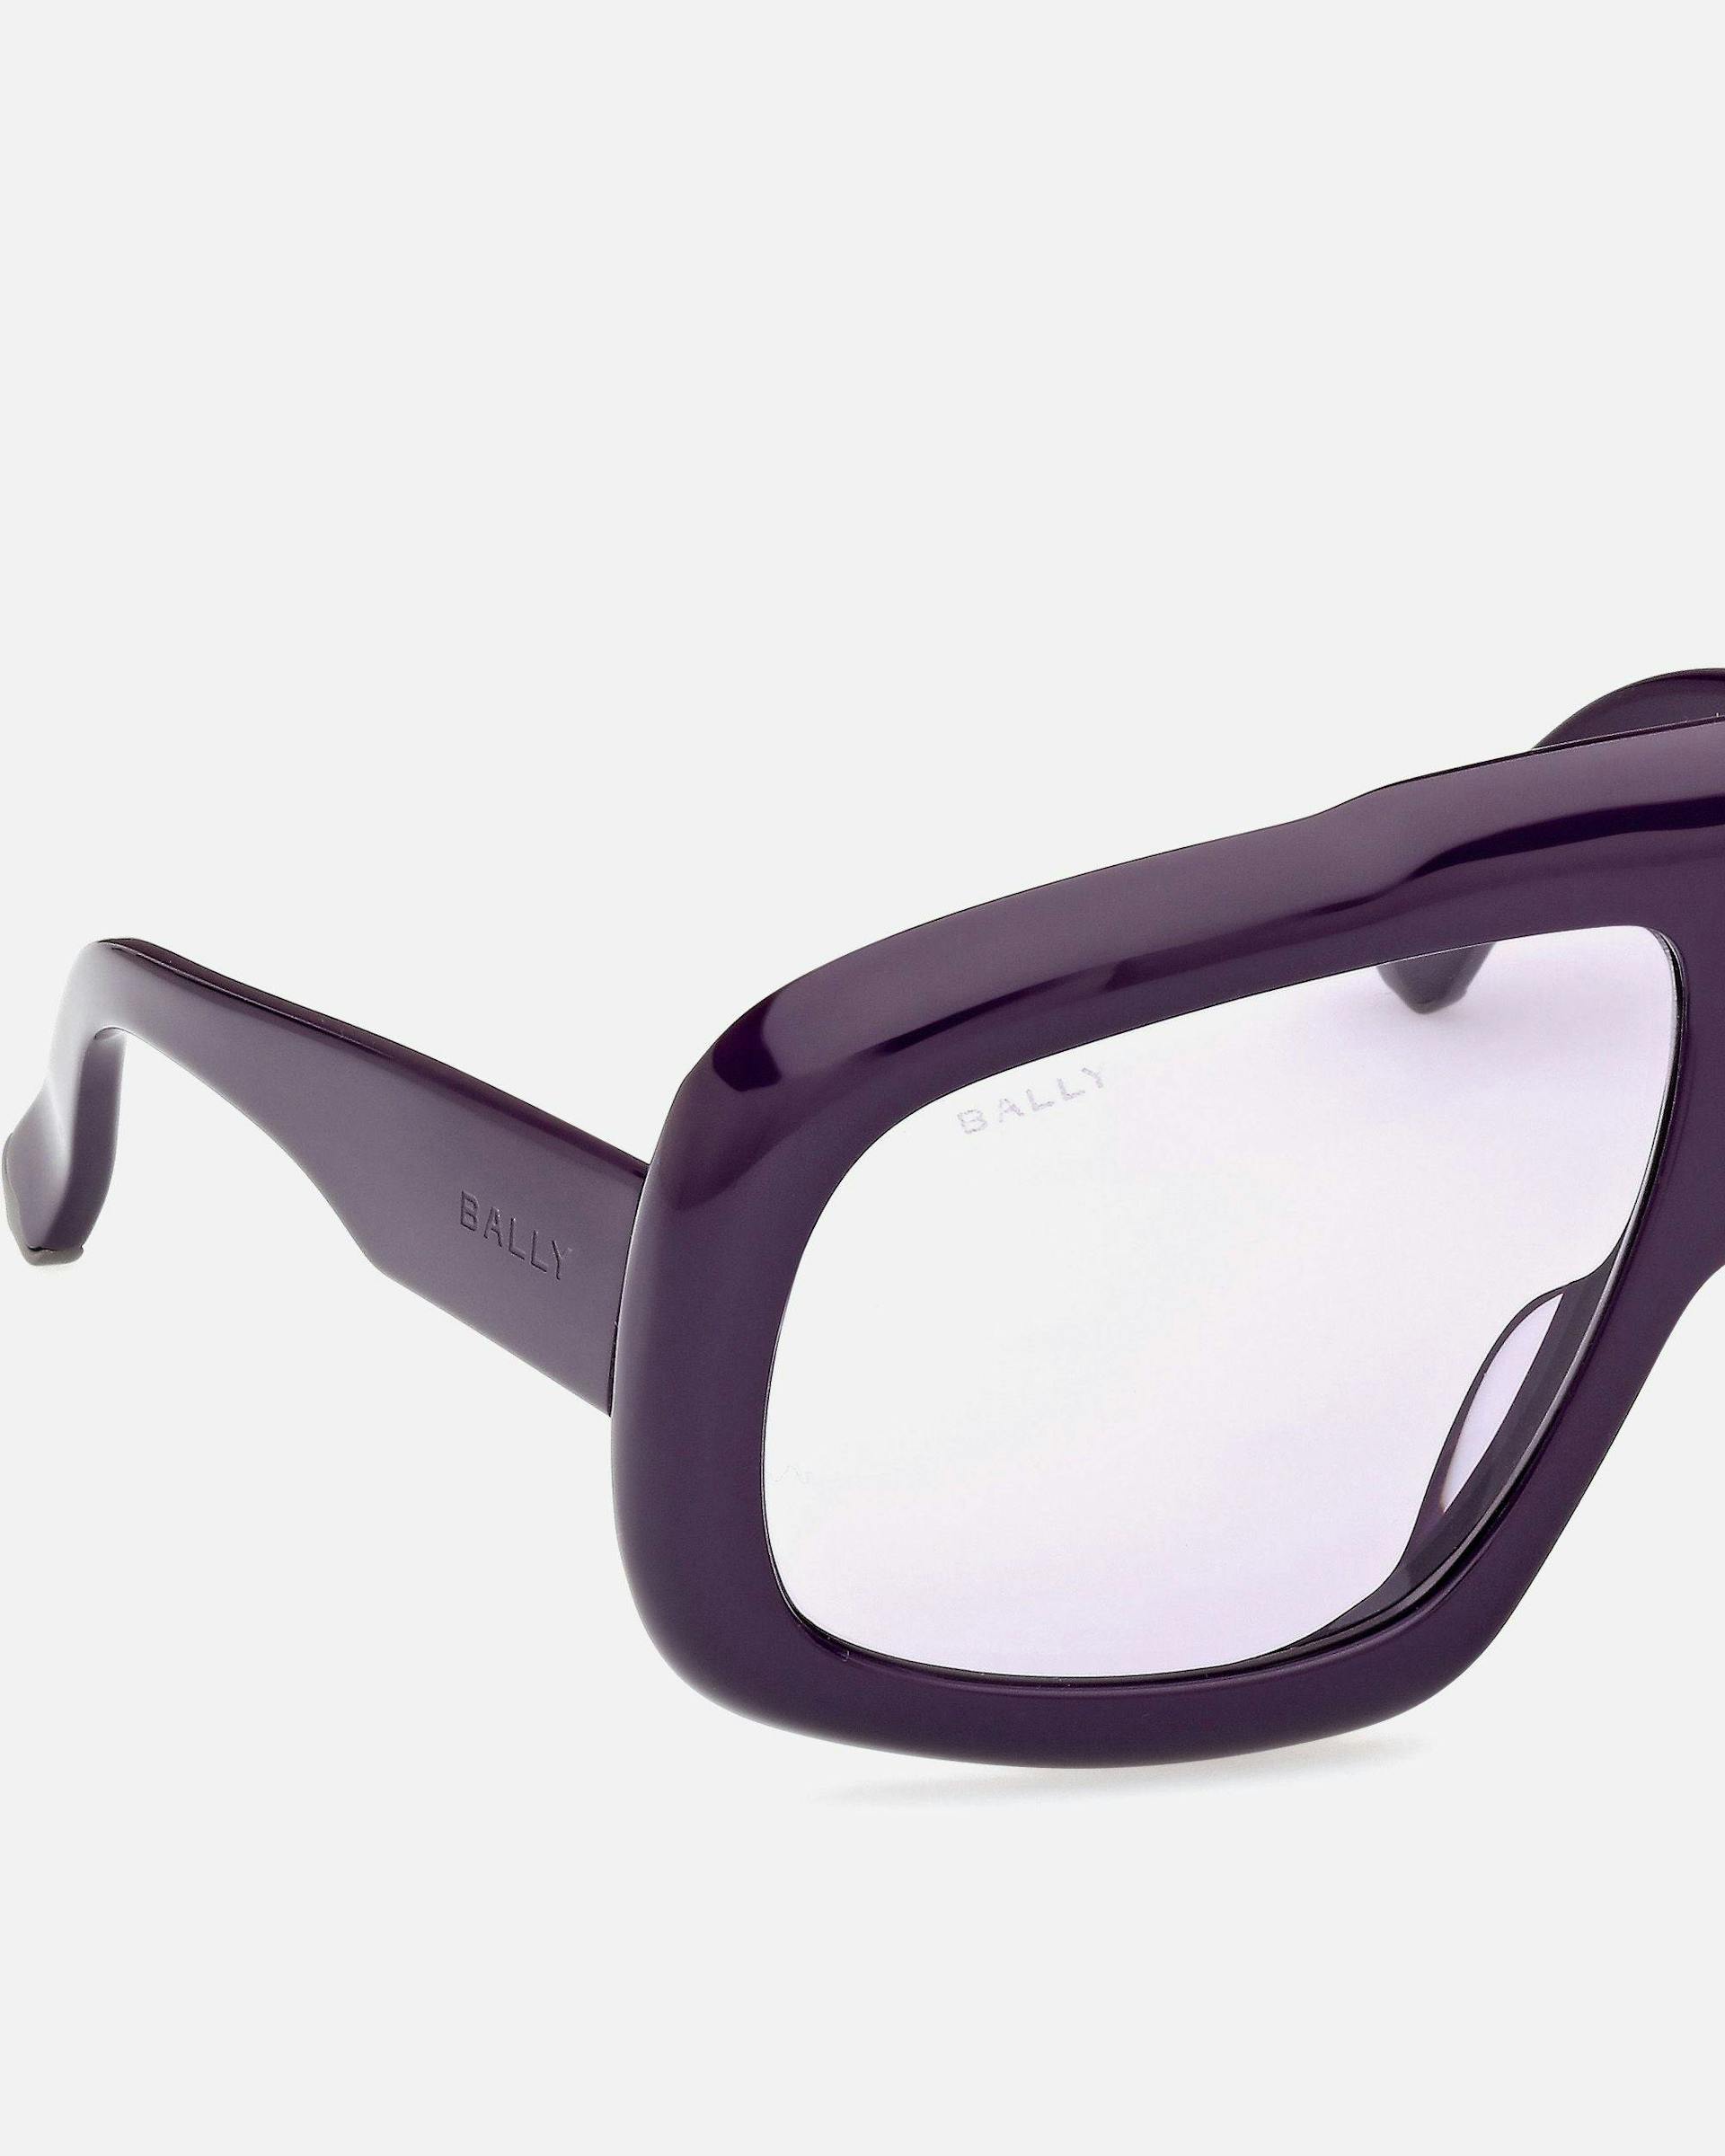 Eyger Acetate Sunglasses in Purple and Lilac | Bally | Still Life Detail